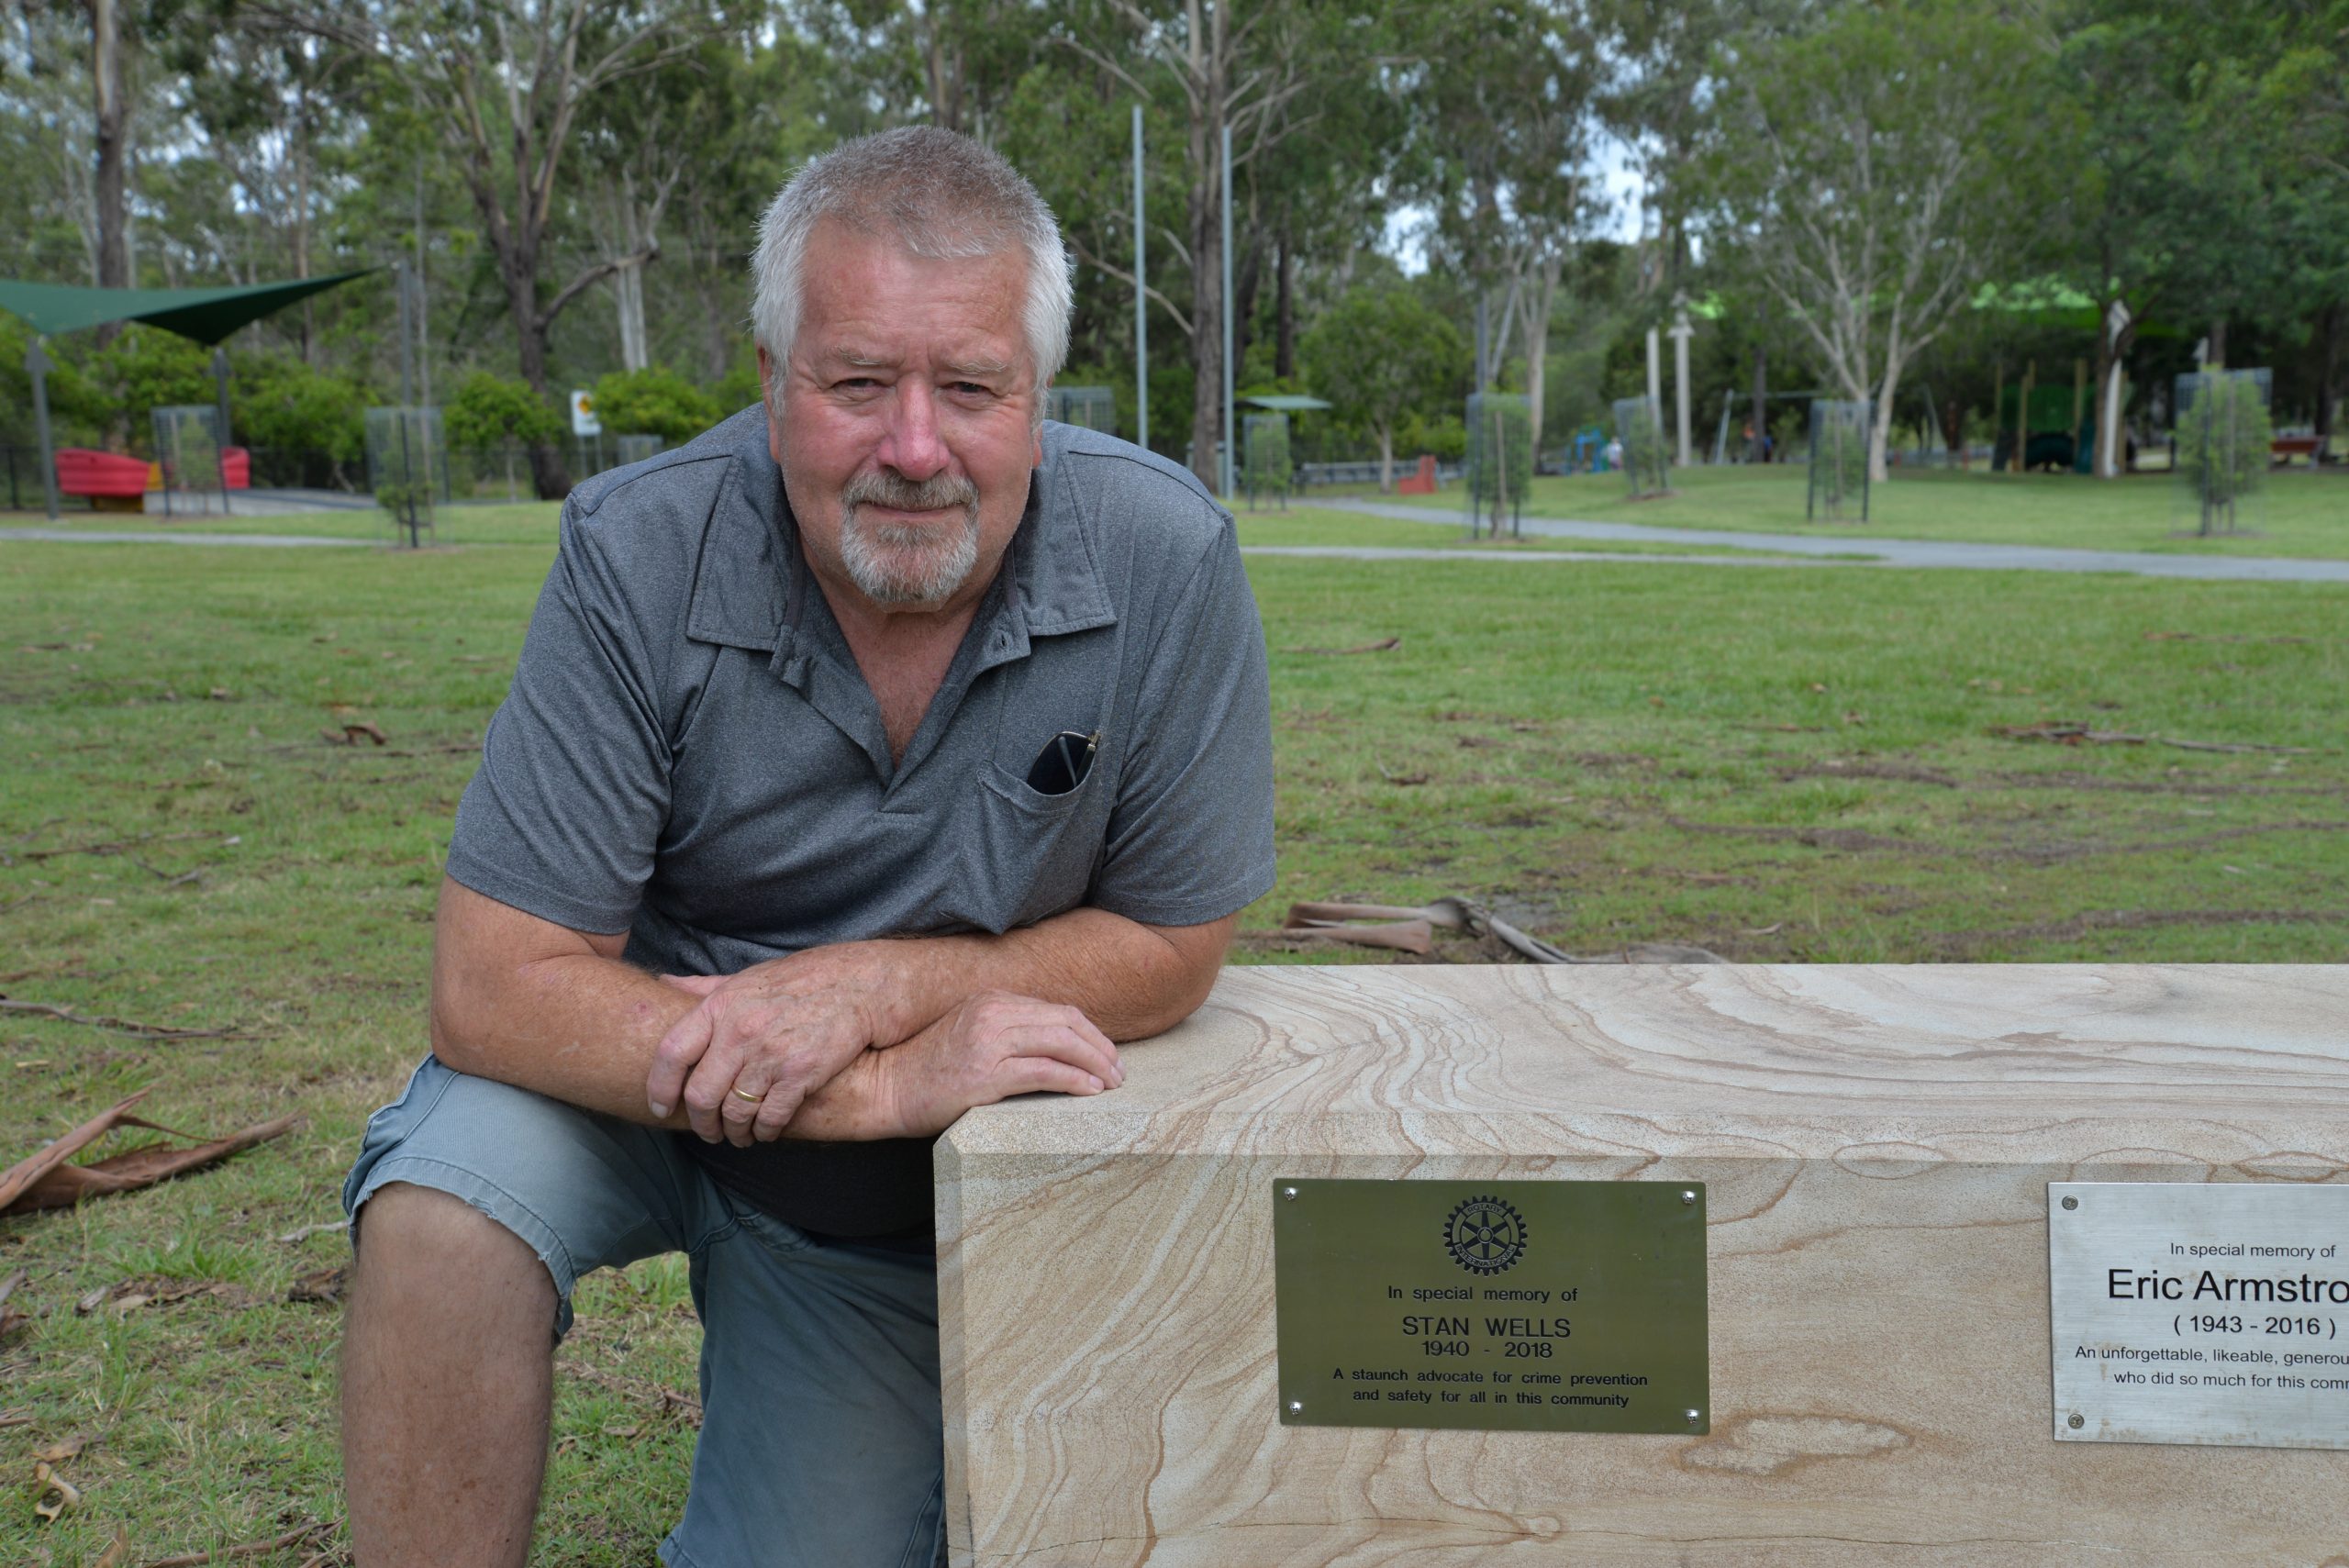 Bob Wiley in Rotary Park with the plaque for Stan Wells